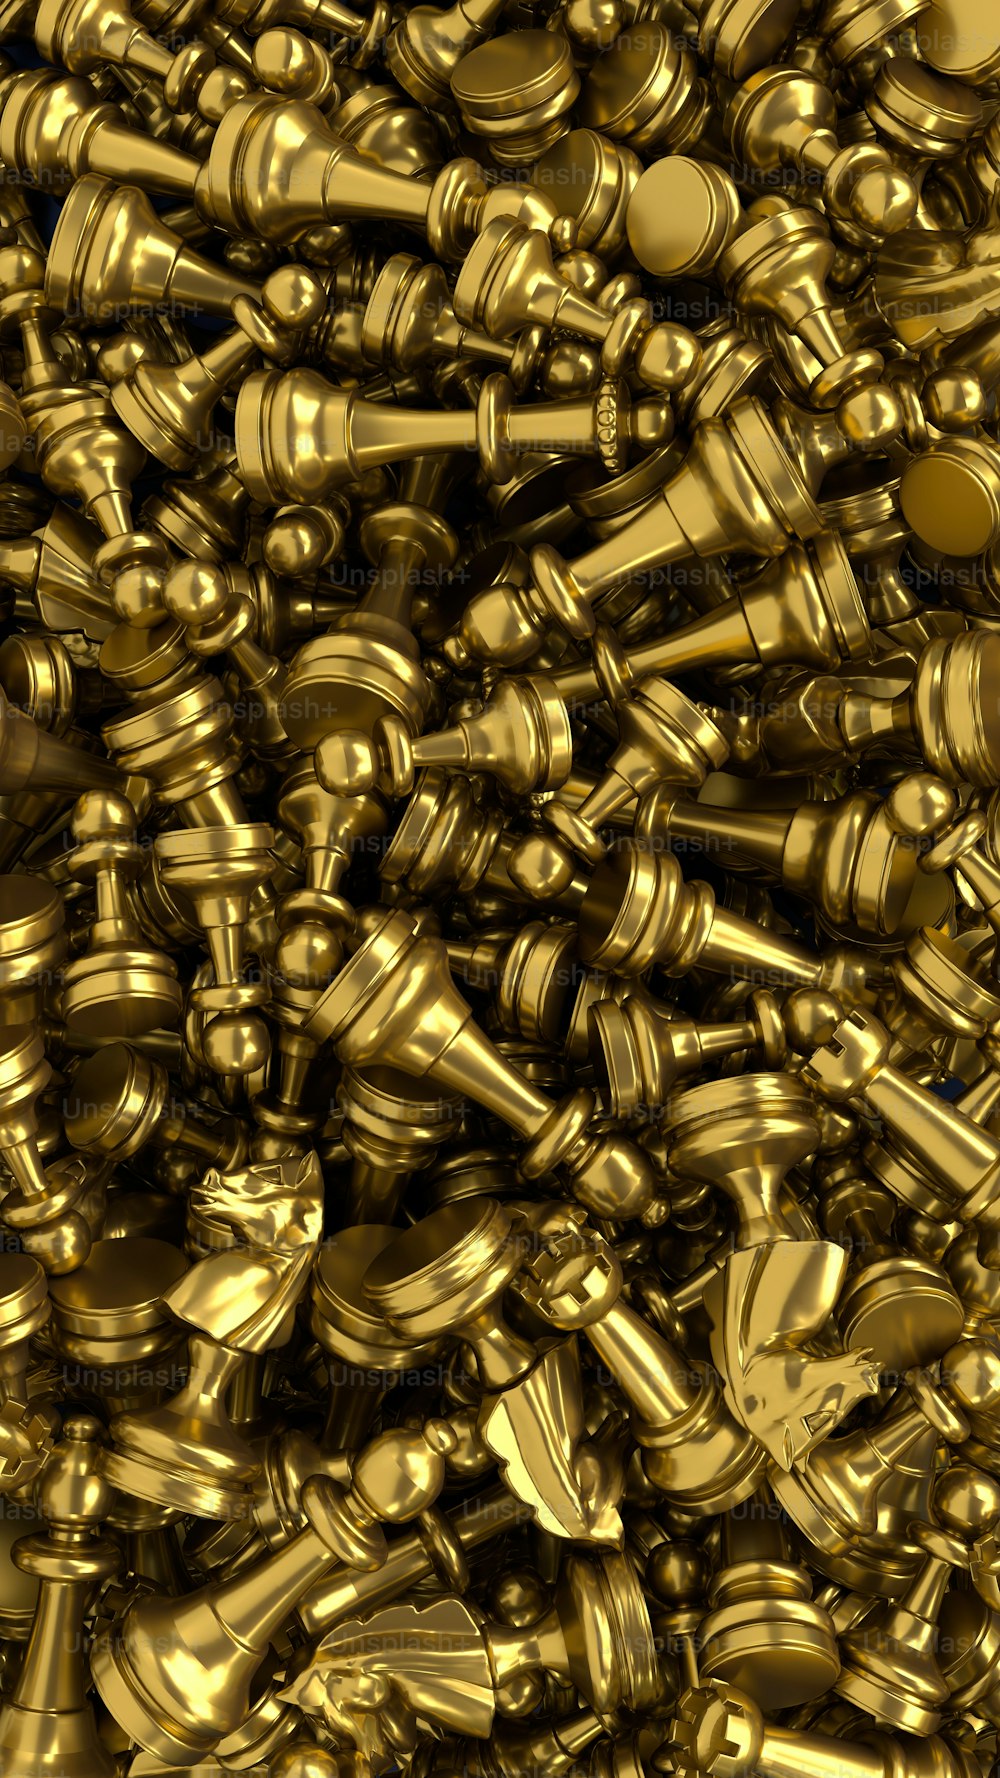 a large pile of shiny gold objects